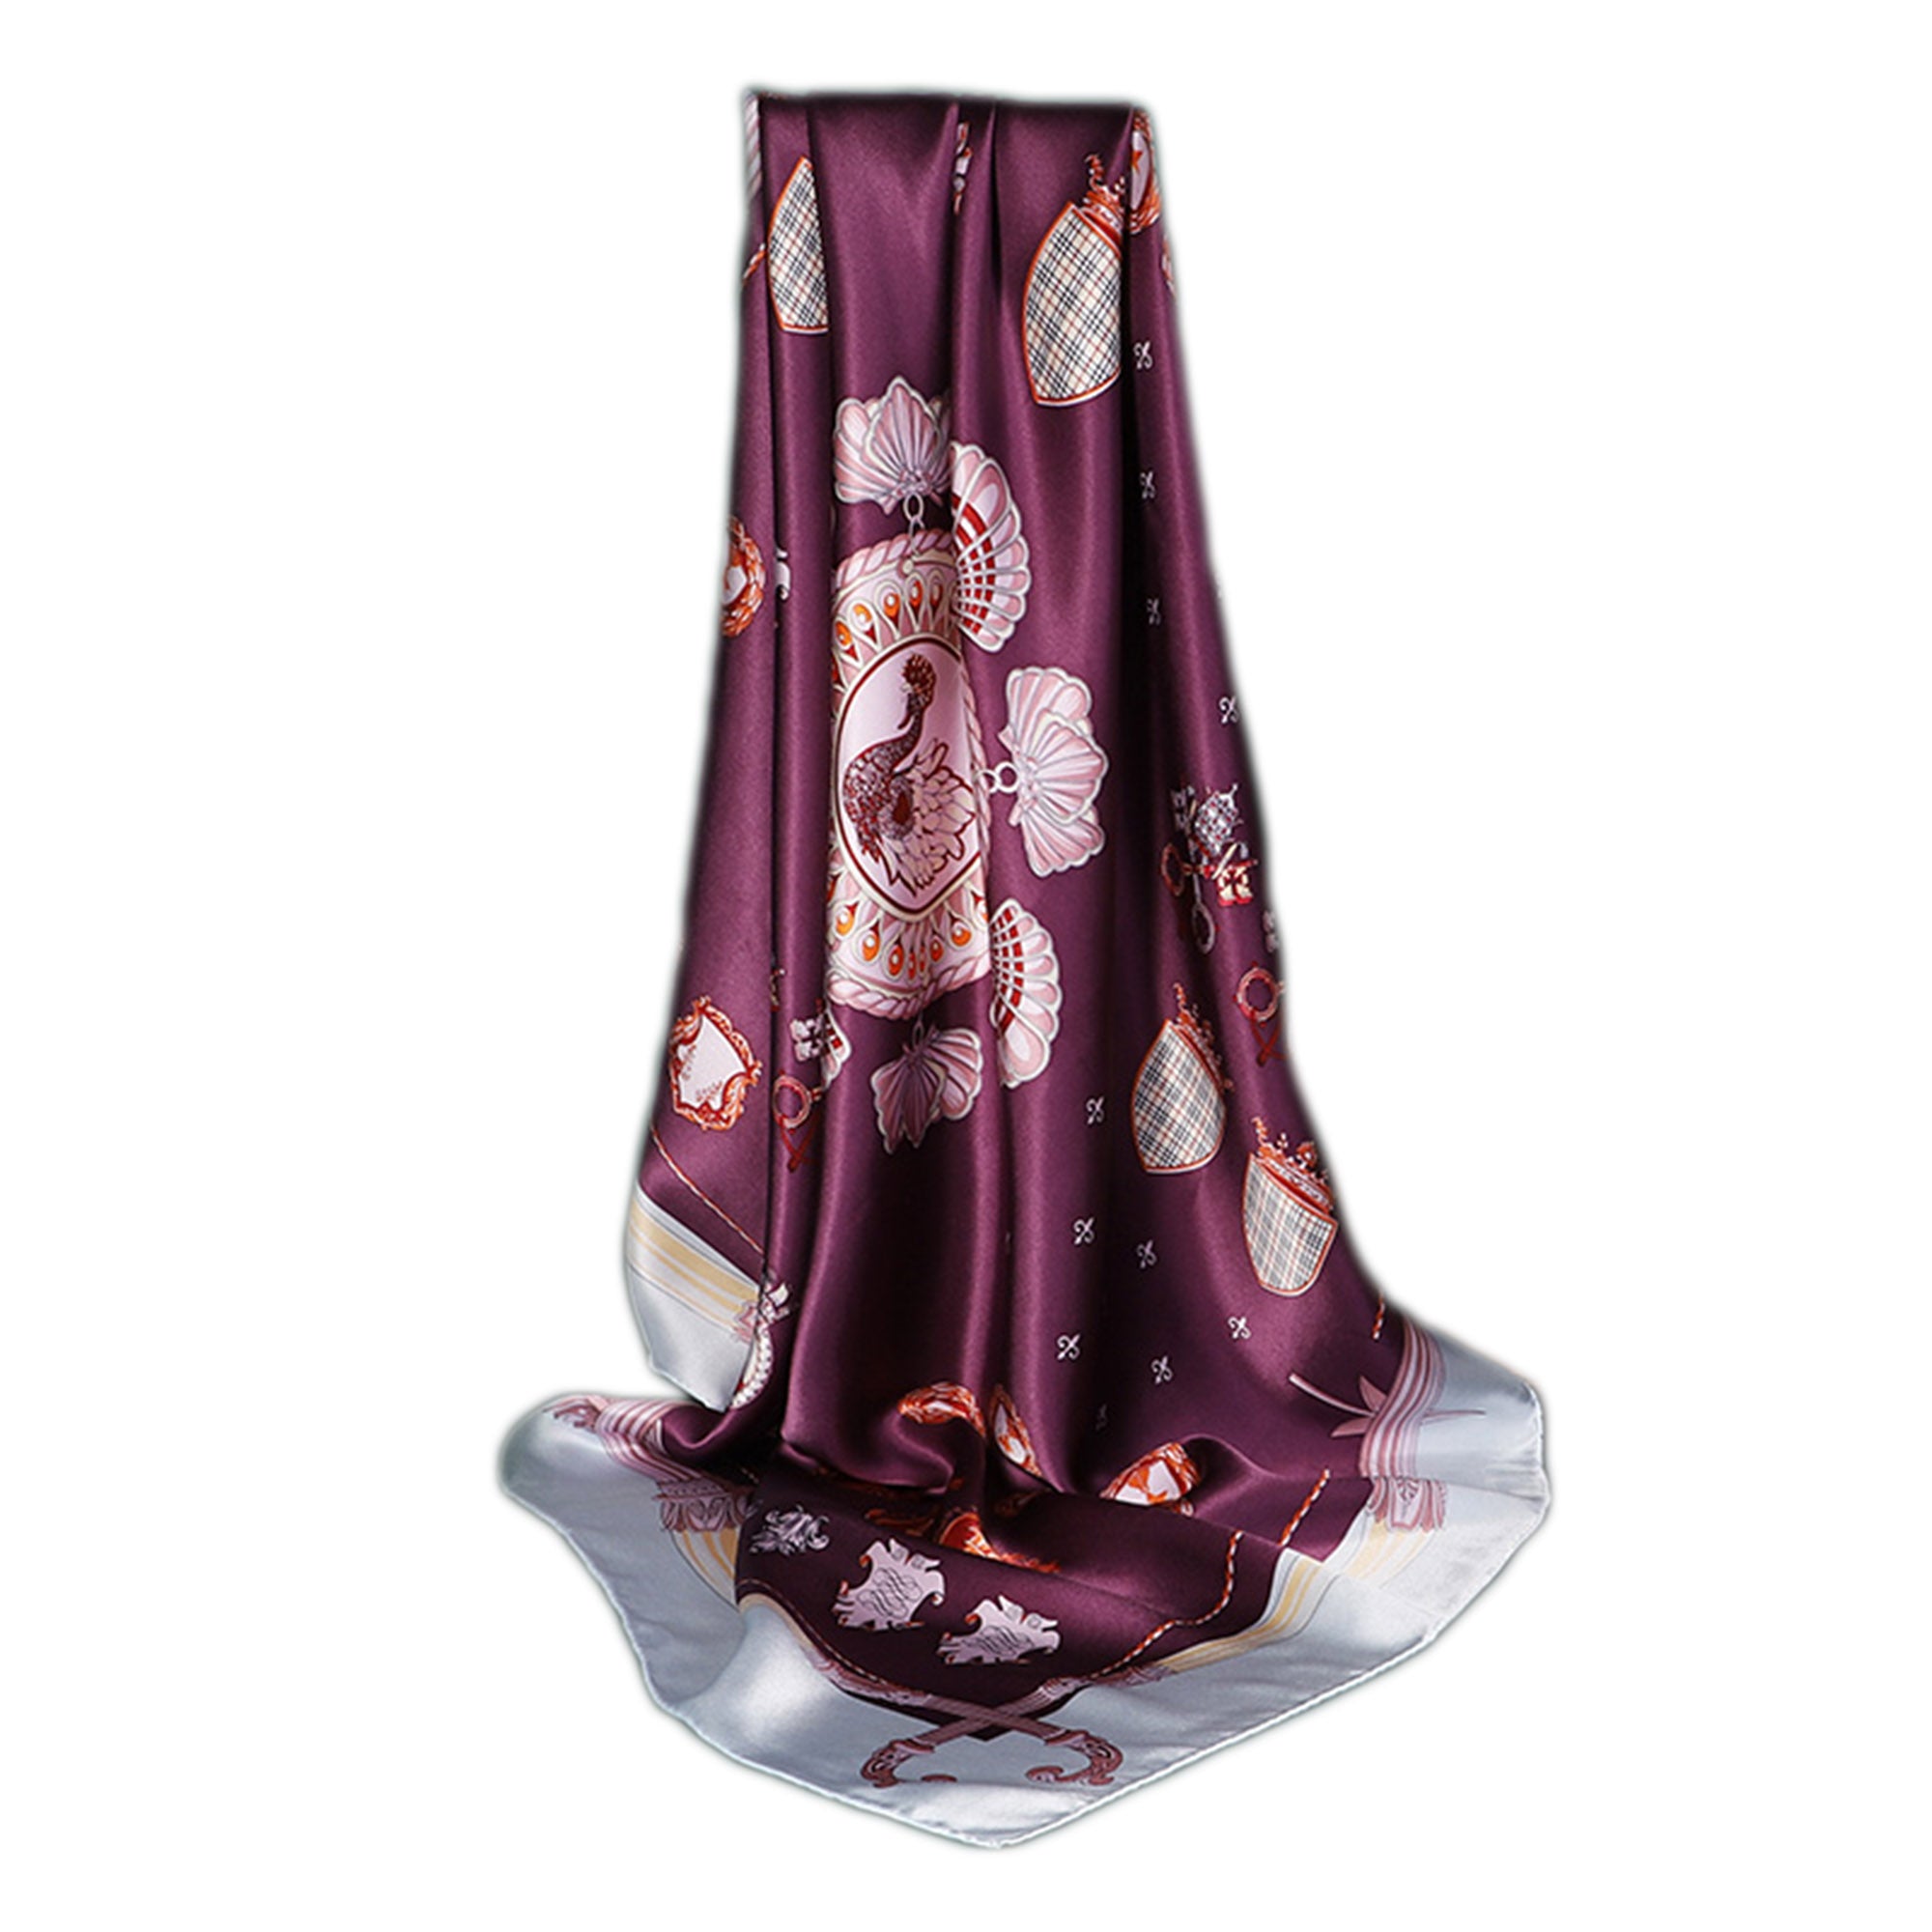 35"x35" Large Square Printed Silk Charmeuse Scarf